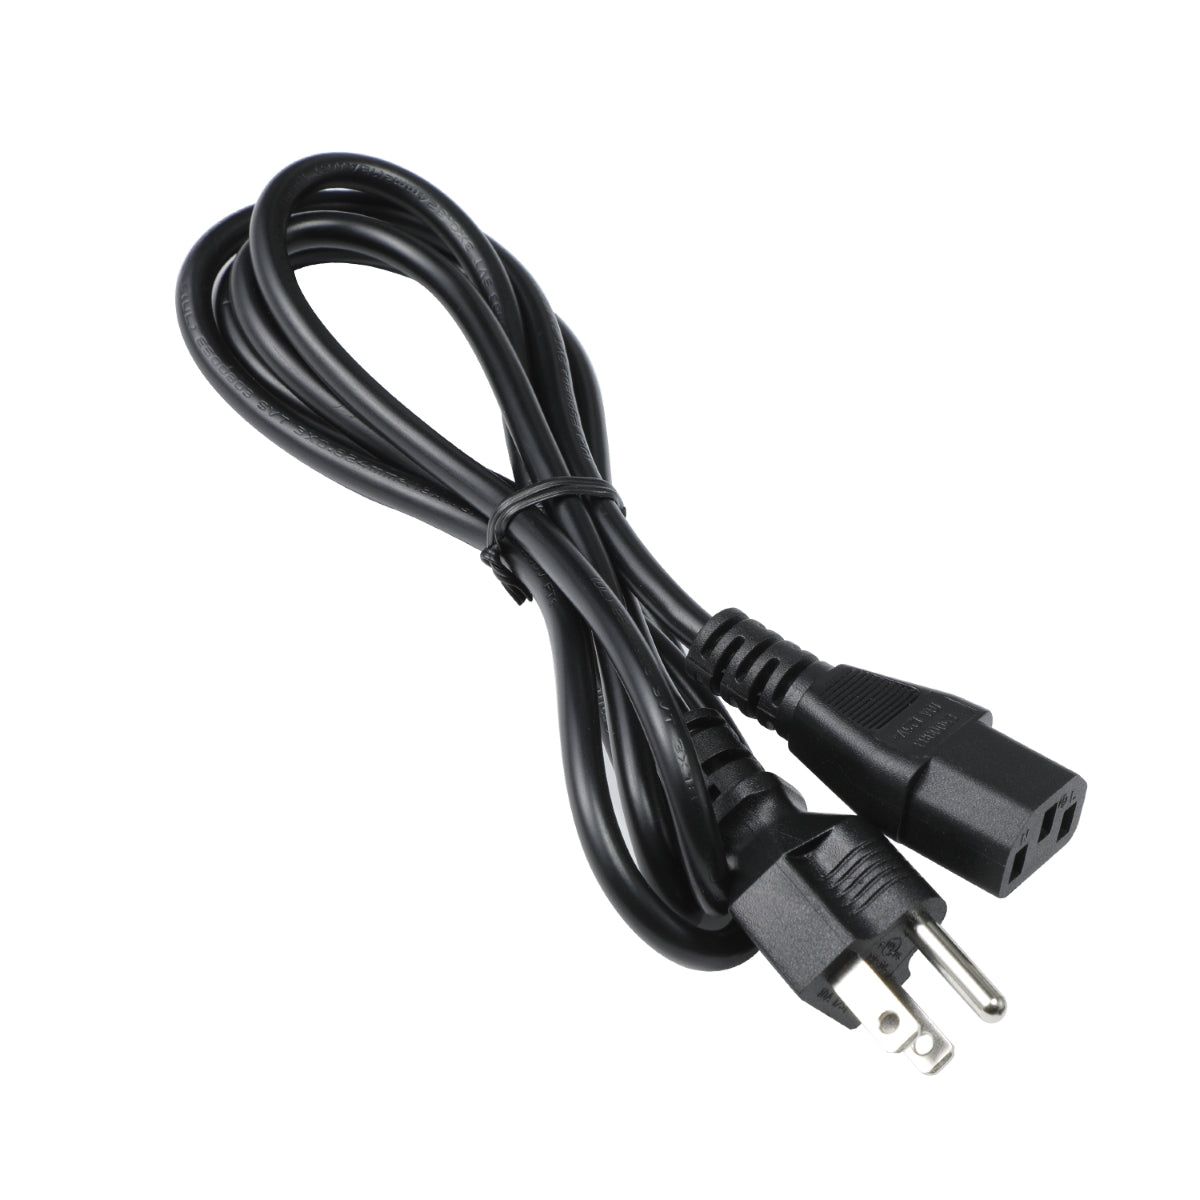 Power Cord for ViewSonic TD2223 Monitor